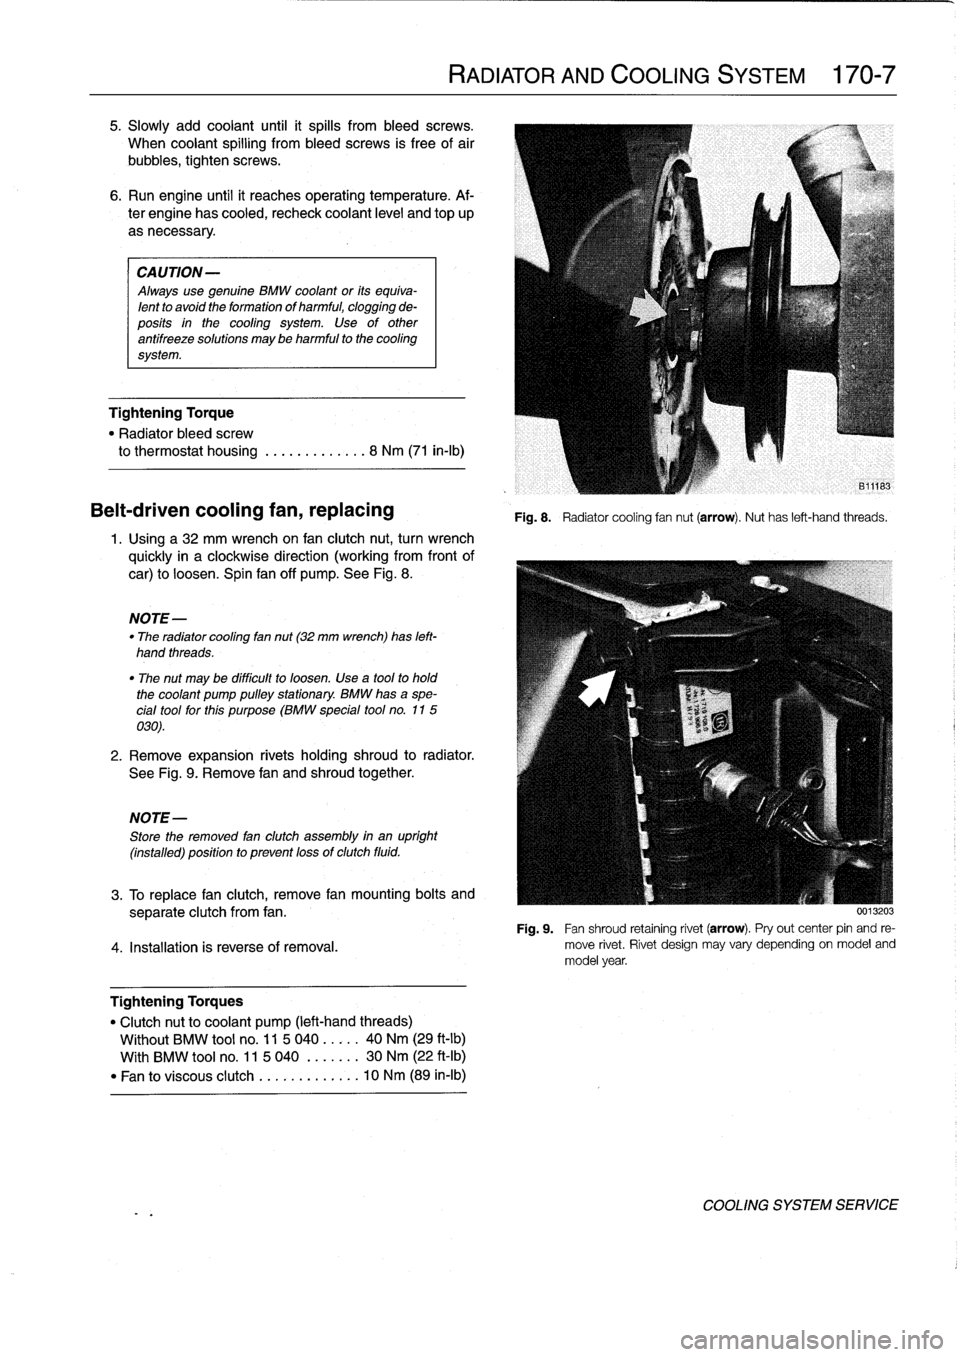 BMW 323i 1997 E36 Workshop Manual 5
.
Slowly
add
coolant
until
it
spills
from
bleed
screws
.

When
coolant
spillíng
from
bleed
screws
is
free
of
air

bubbies,
tighten
screws
.

6
.
Run
engine
until
it
reaches
operatíng
temperature
.